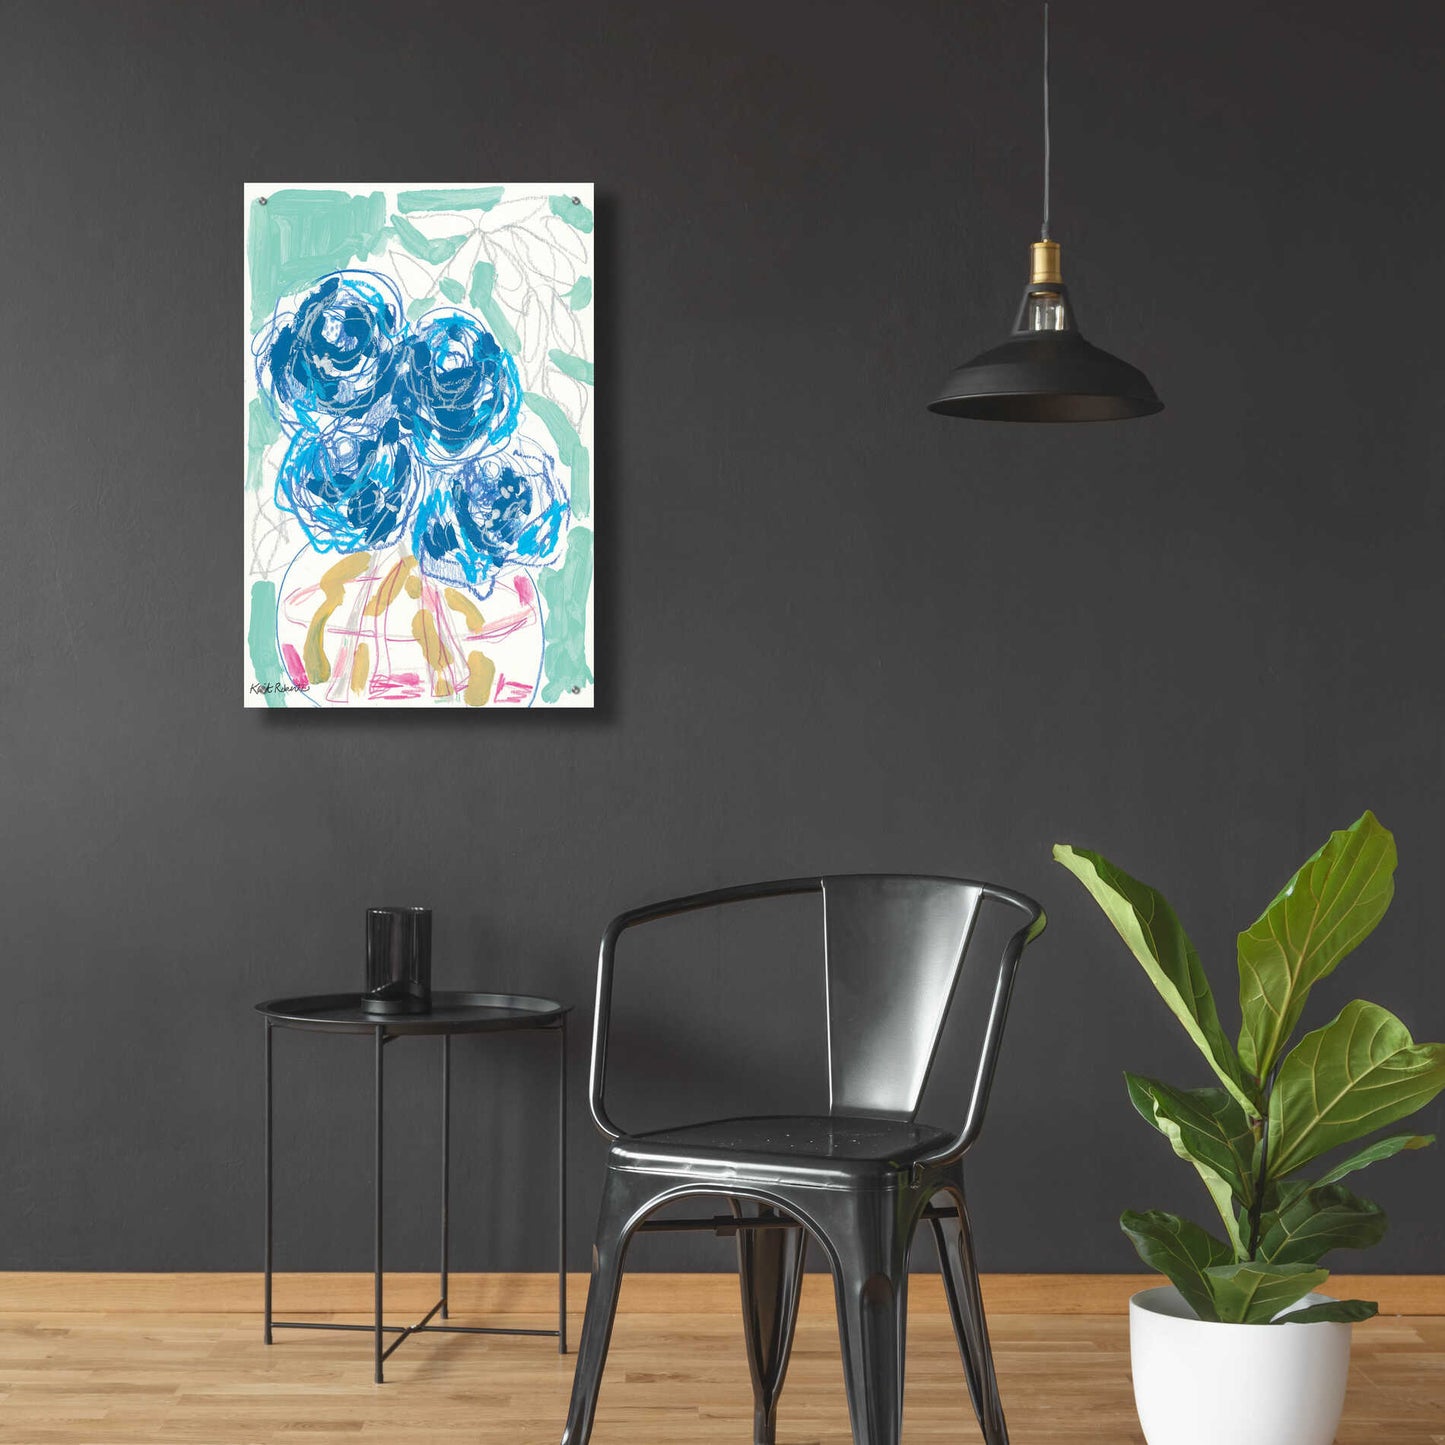 Epic Art 'Nightstand Blooms in Water' by Kait Roberts, Acrylic Glass Wall Art,24x36